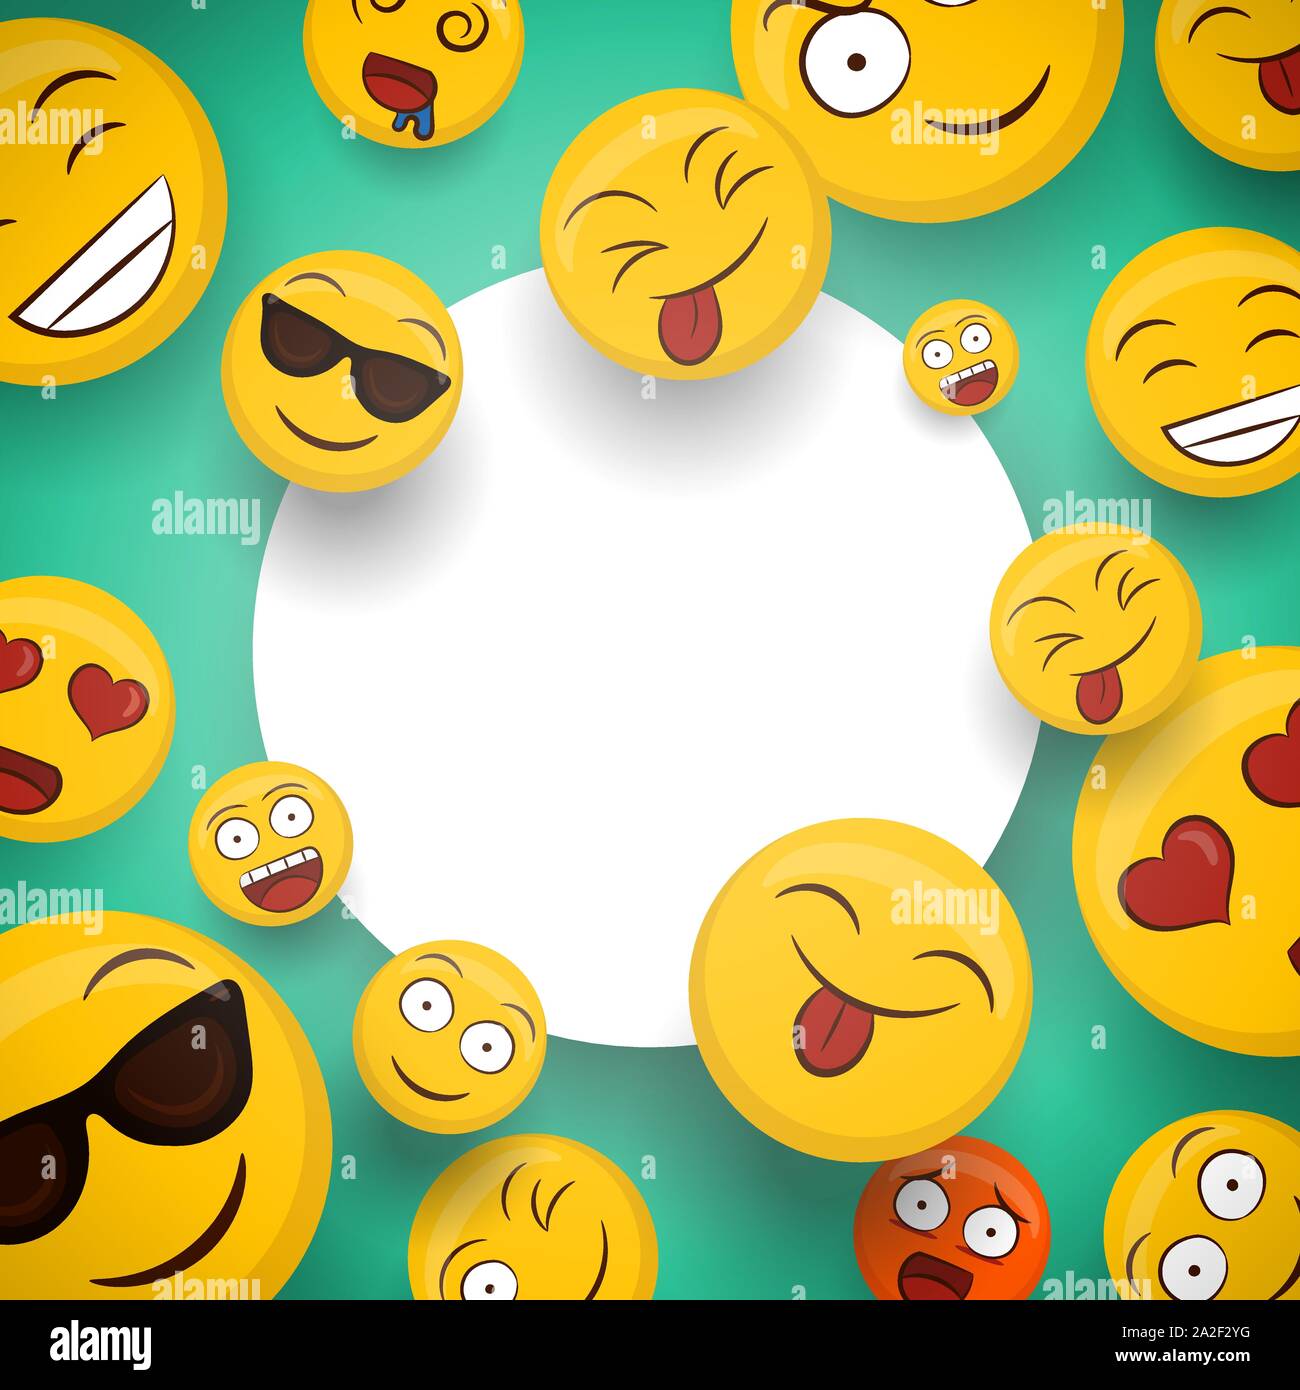 Social yellow emoticon icons on isolated white copy space template. Fun smiley face cartoons includes happy, cute and funny emotions. Stock Vector